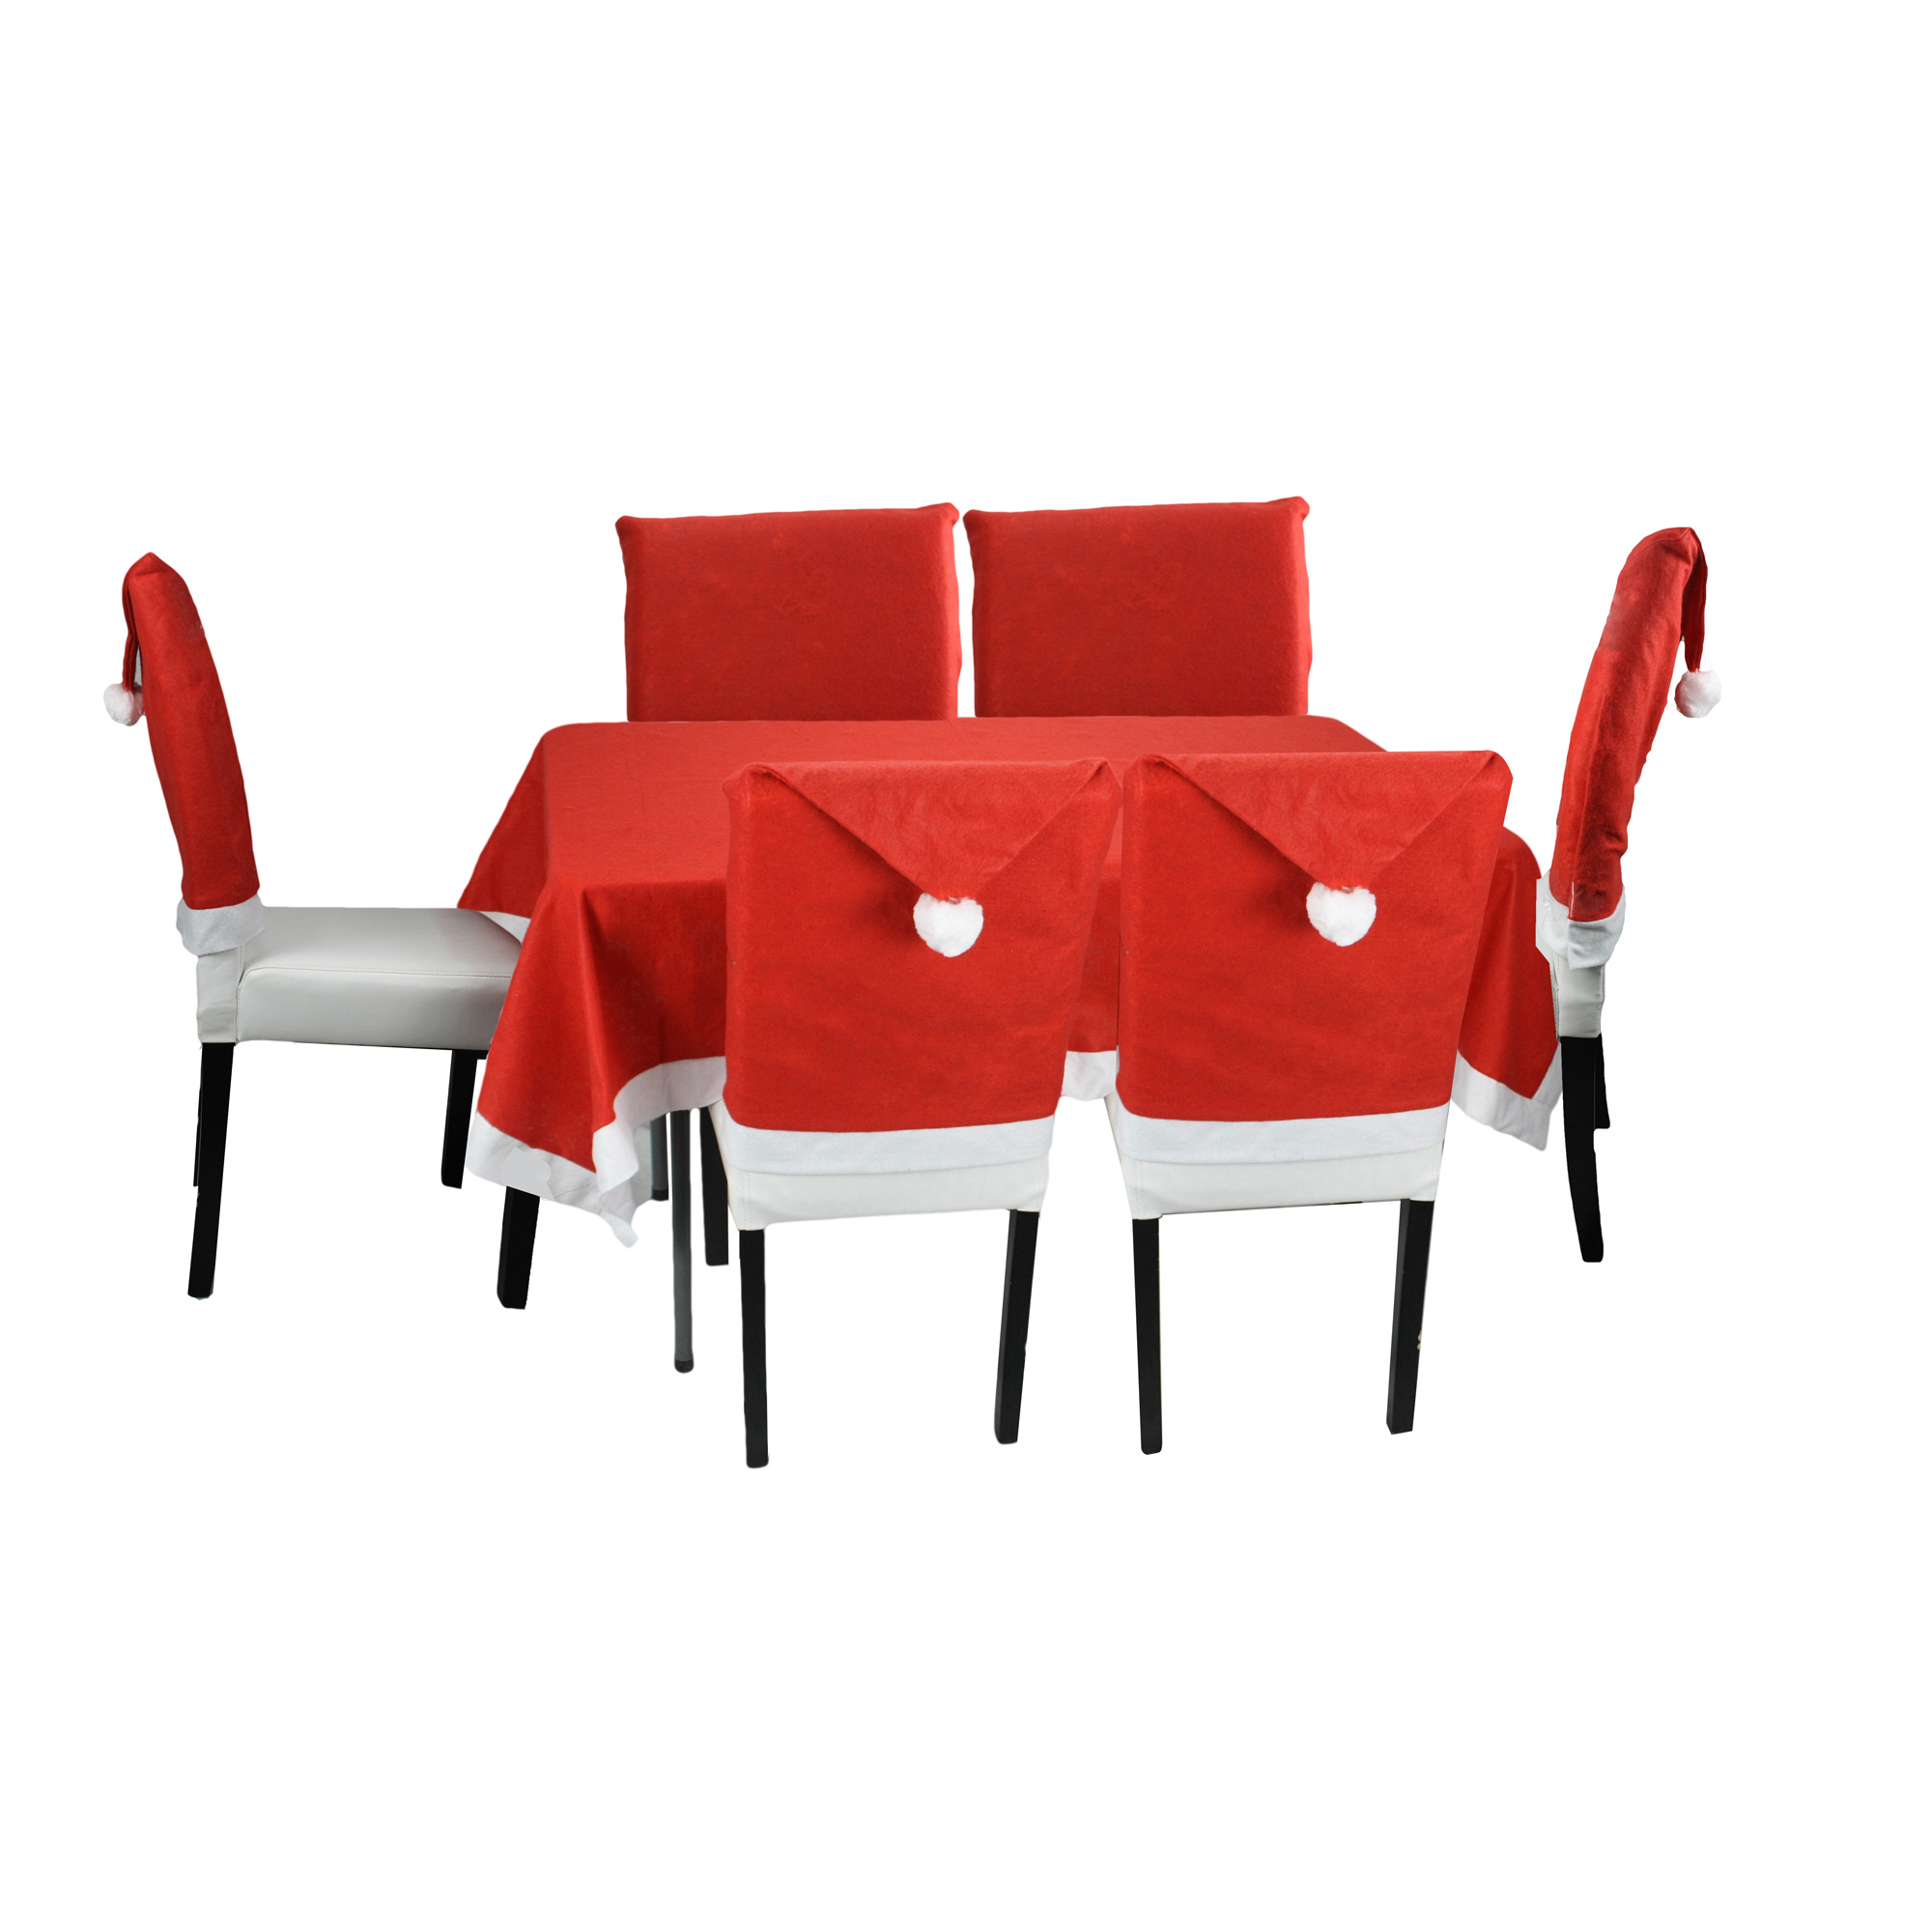 factory rectangle red christmas table cloth tablecloths for party home 